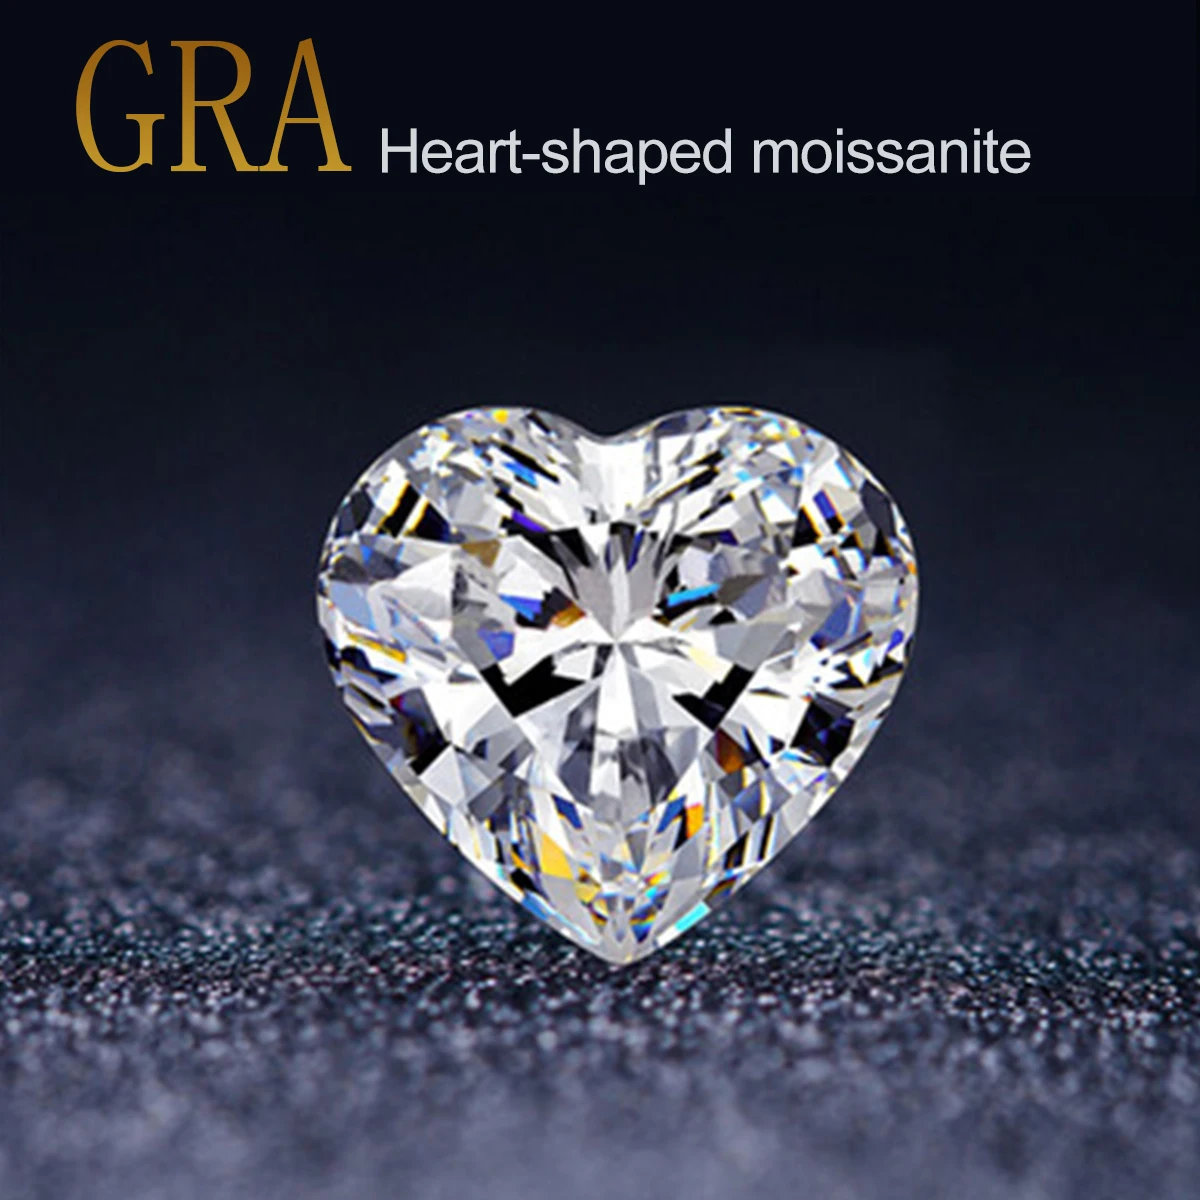 03ct To 4ct Loose Gemstones Moissanite Stones D Color VVS1 Heart Shaped Excellent Cut Pass Diamond Tester For Womens Jewelry